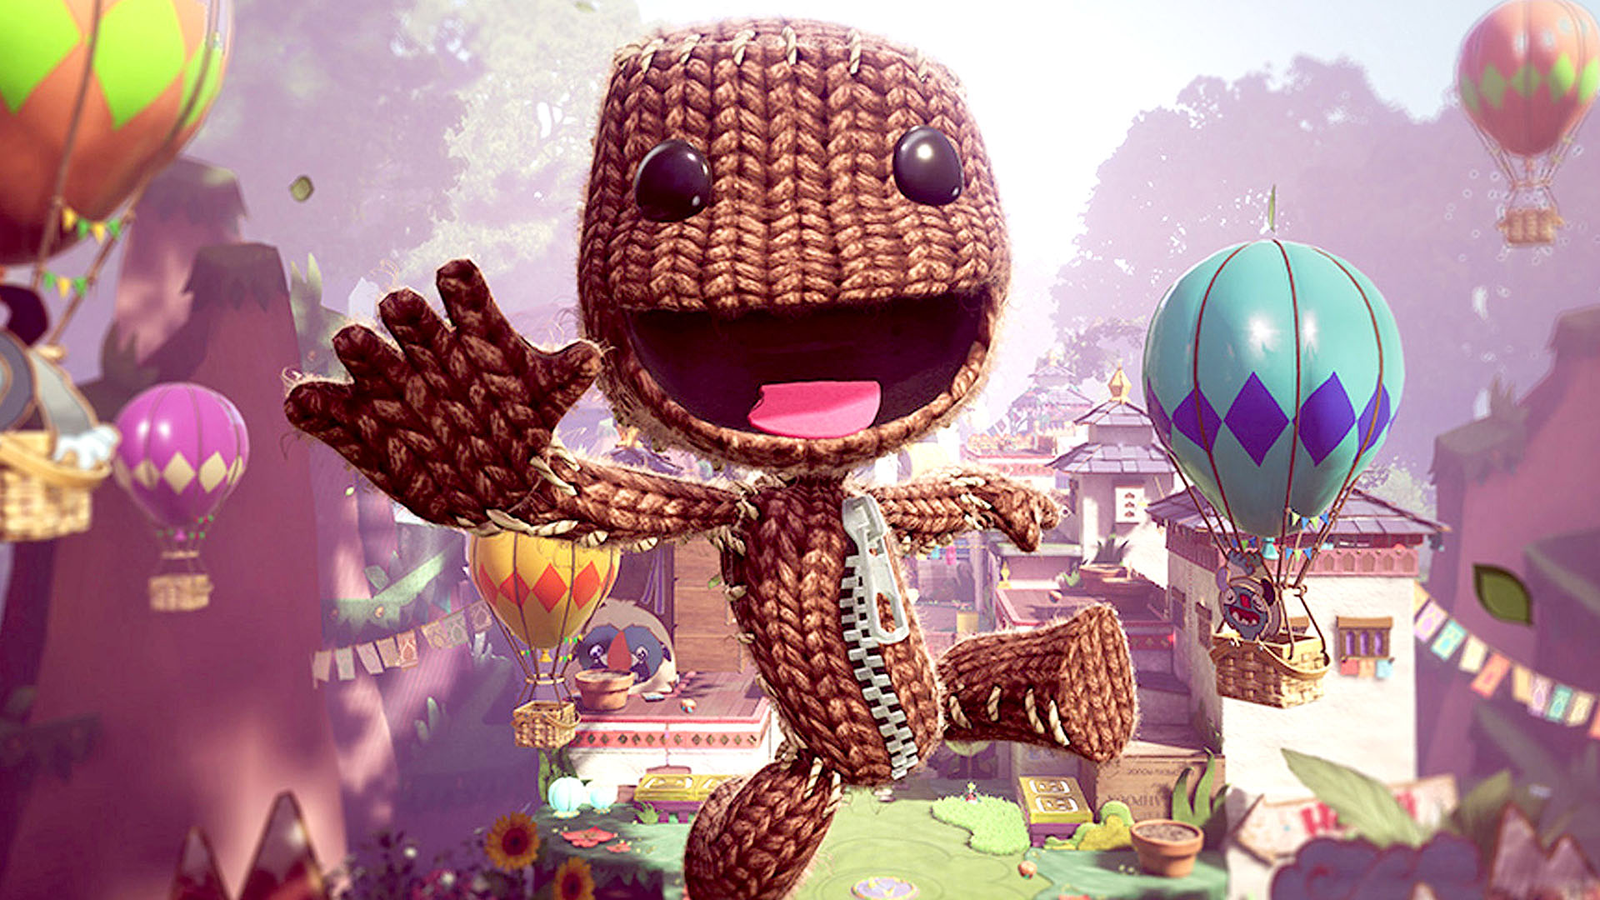 Sackboy: A Big Adventure multiplayer update is now live with cross-save and  cross-play support